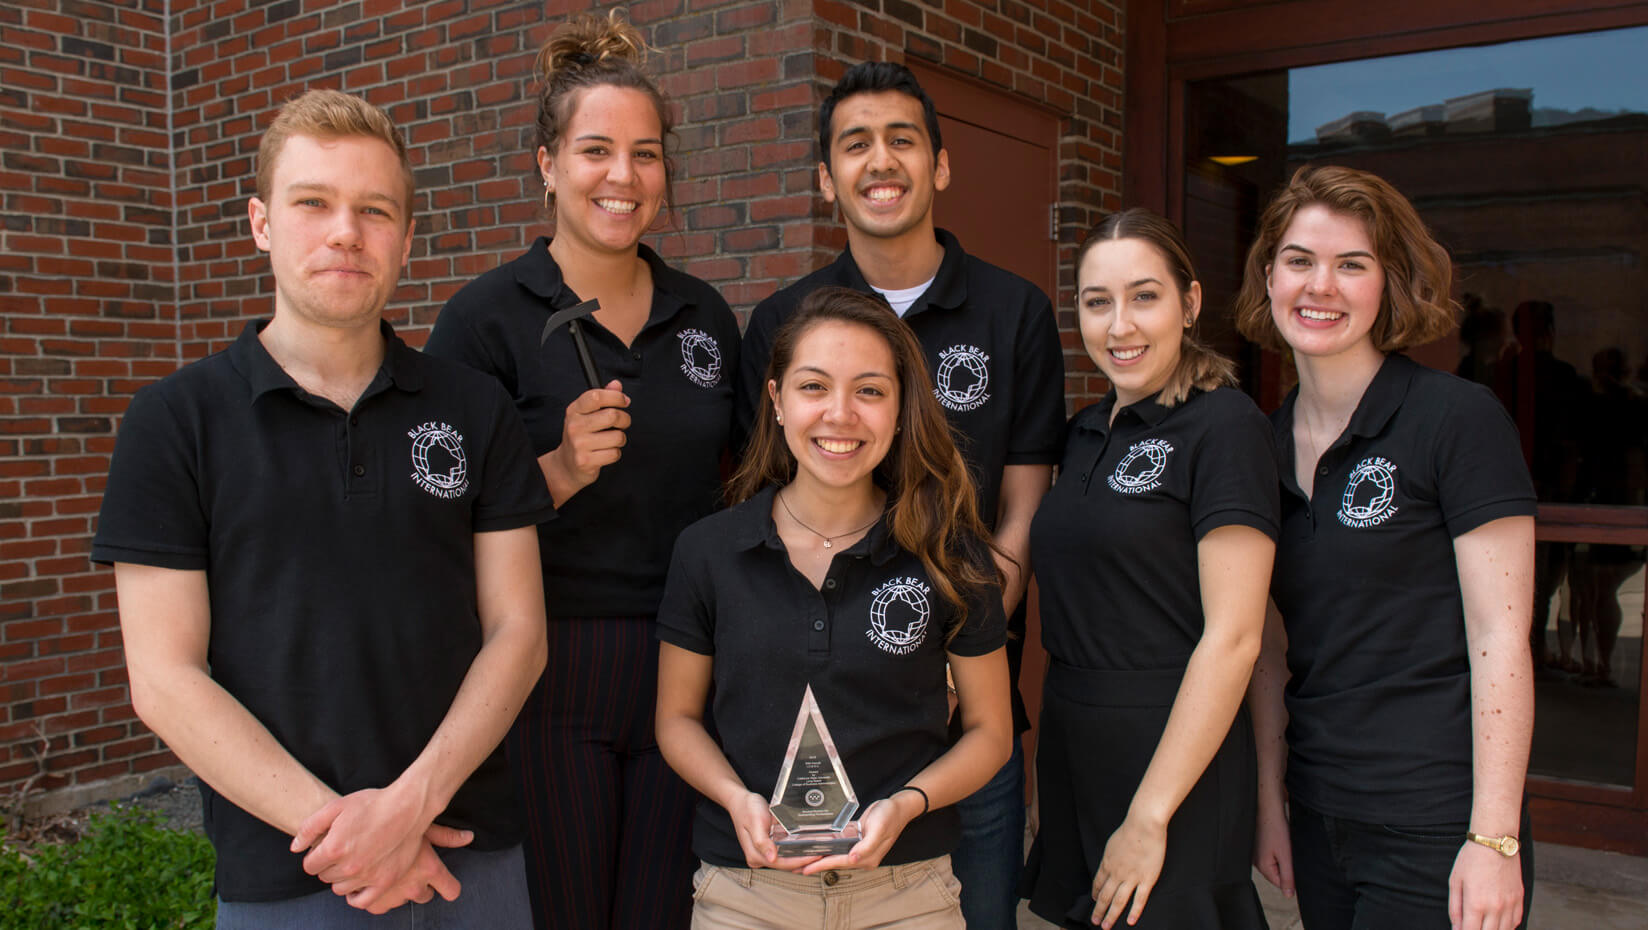 Maine Business School students posing with award